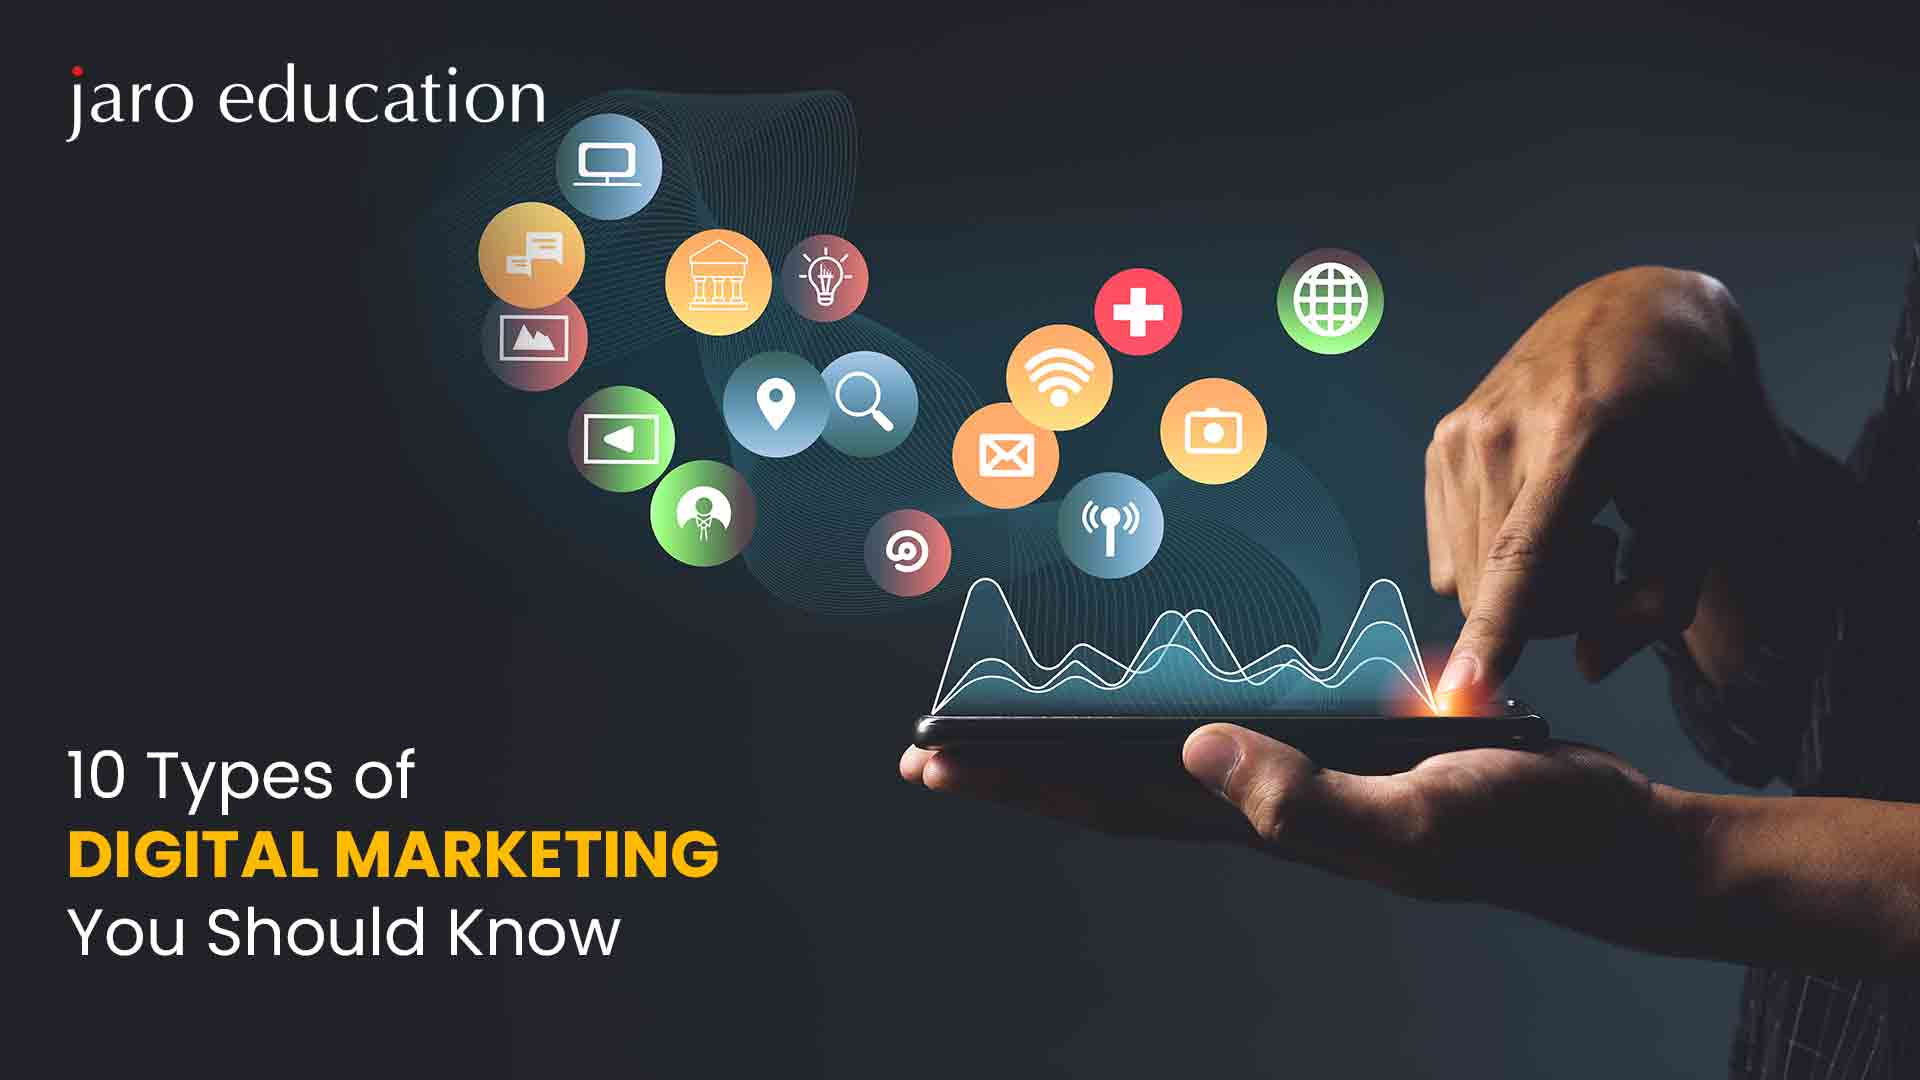 10 Types of Digital Marketing You Should Know